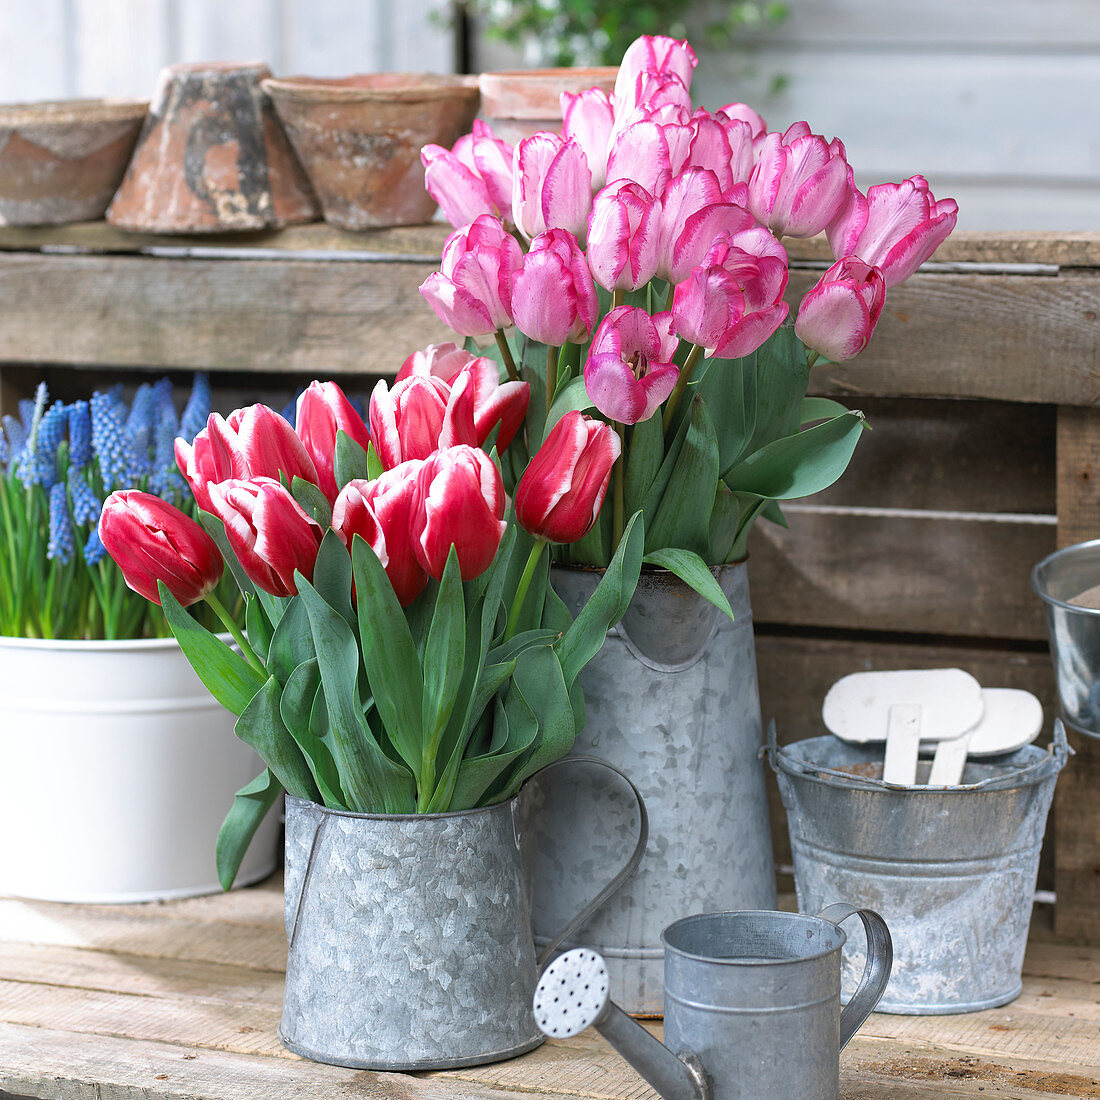 Tulips in waterings cans